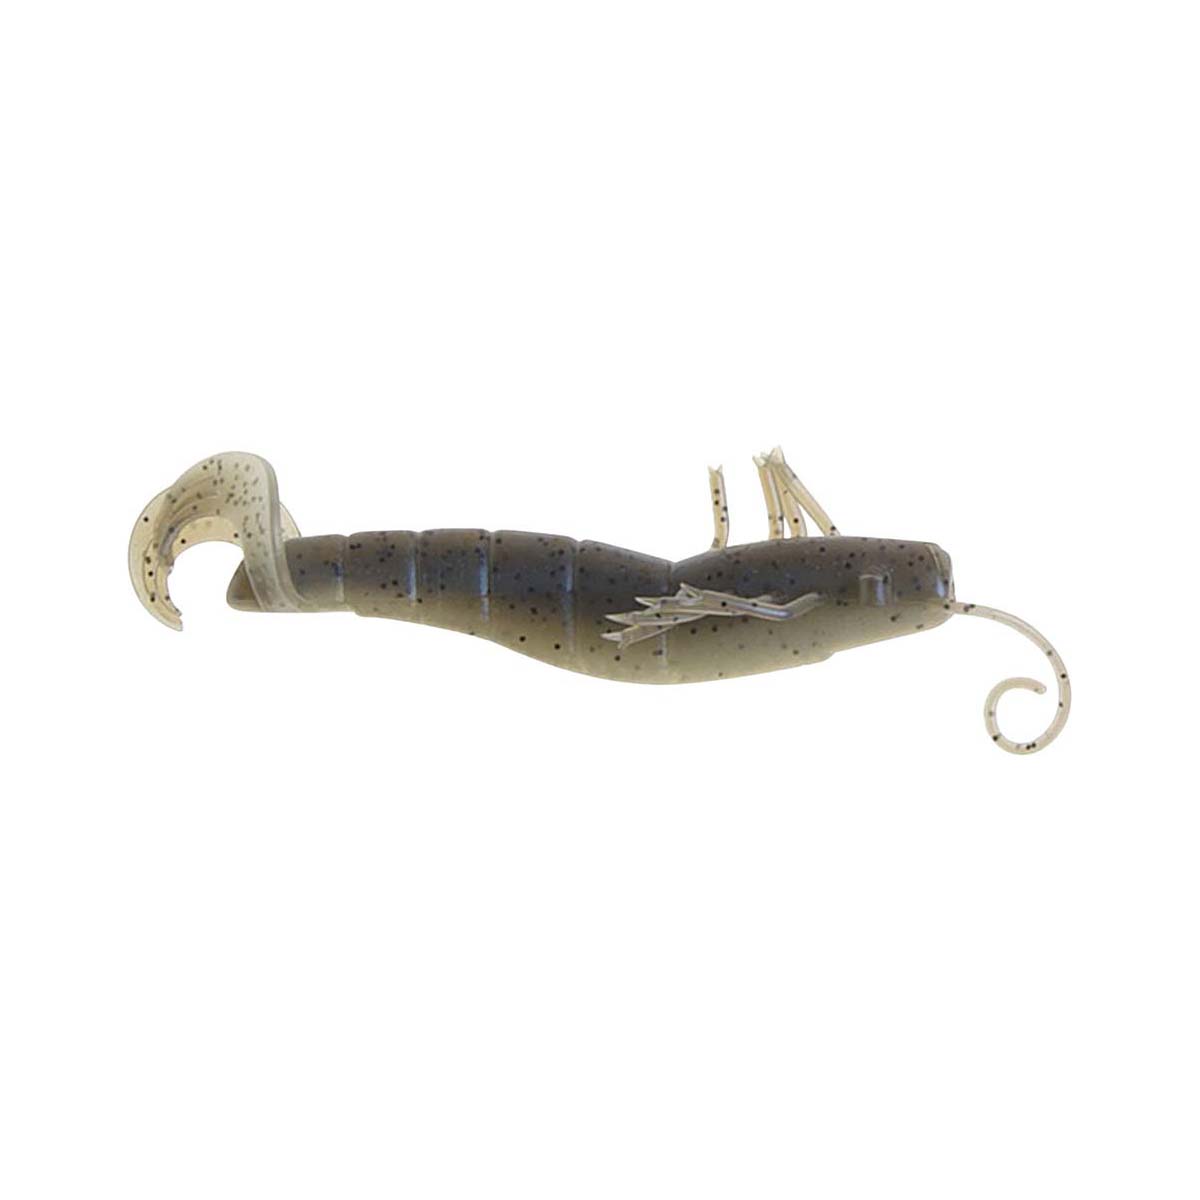 Atomic Plazos Prong Soft Plastic Lure 3in Grey Ghost